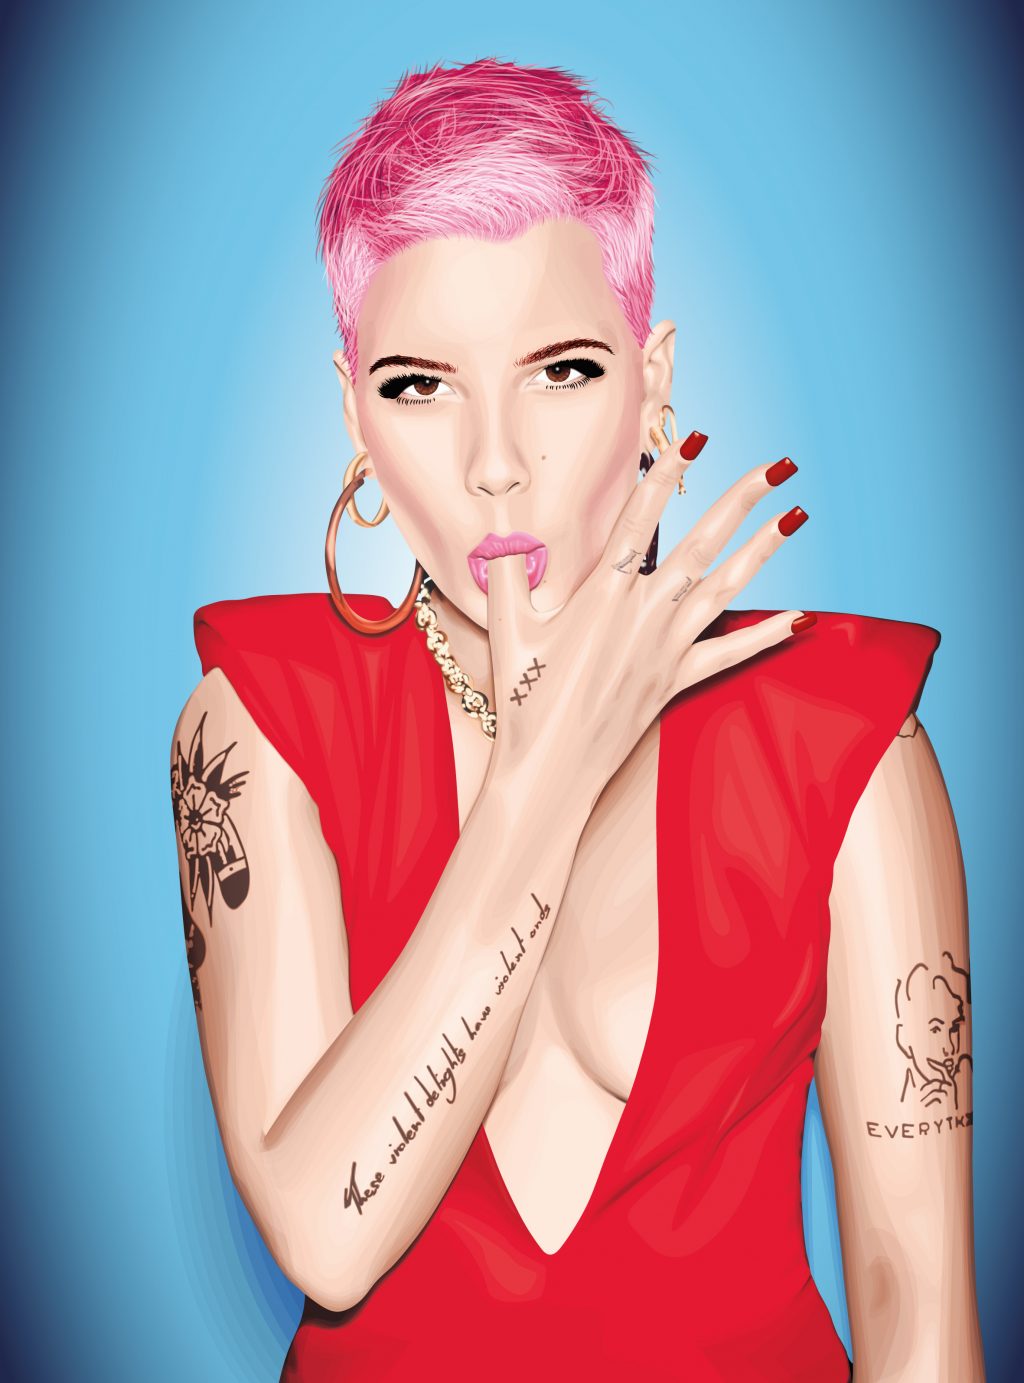 Illustration of the artist Halsey, with pink hair and a red dress